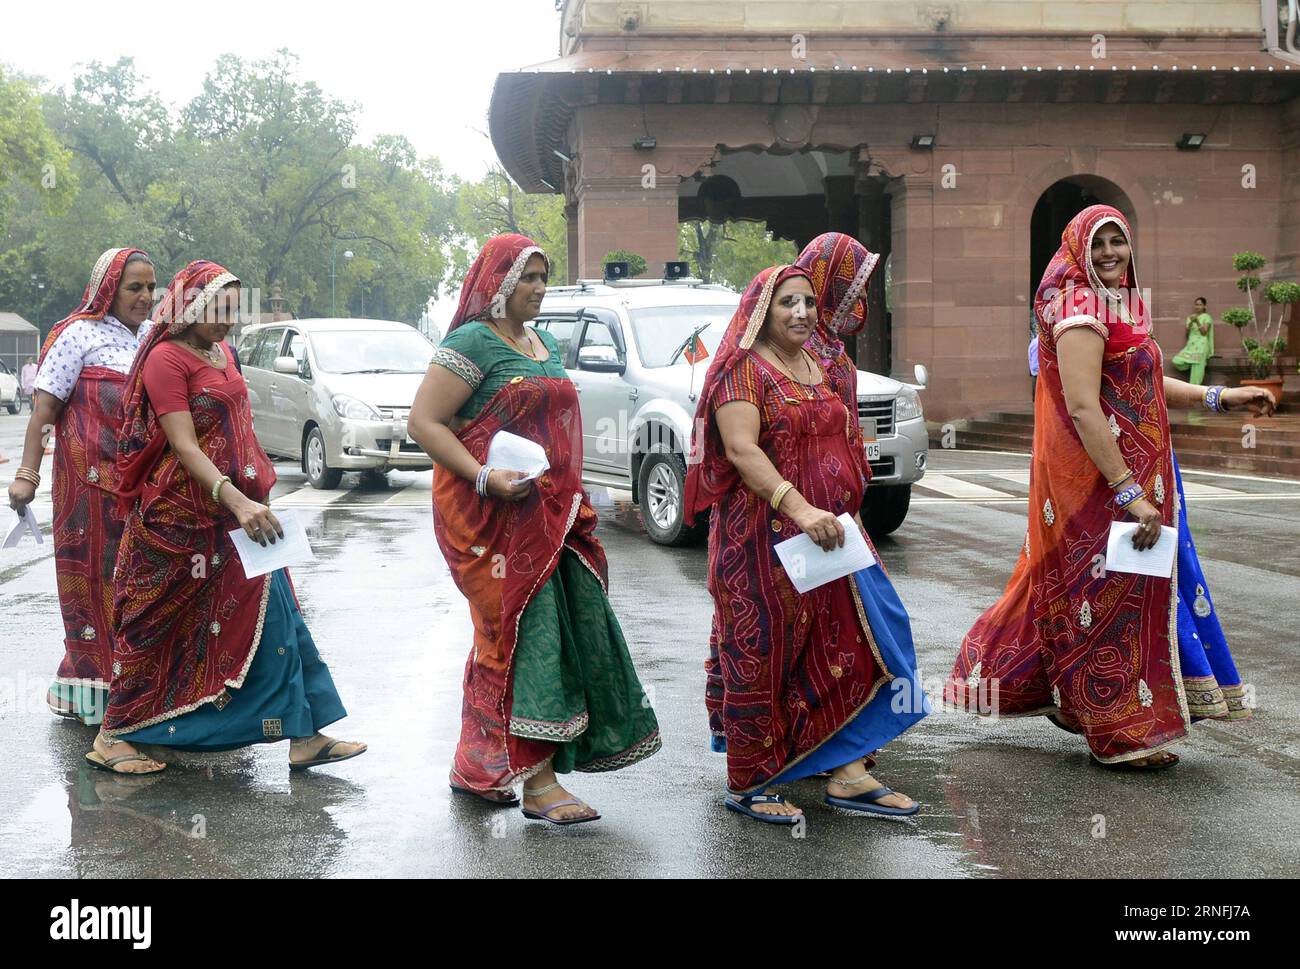 (160811) -- NEW DELHI, Aug. 11, 2016 -- Women dressed with traditional attire from Jhunjhunu district of Rajasthan wait in line to spectate the monsoon session in Indian parliament house in New Delhi, India, on Aug. 11, 2016. ) (wtc) INDIA-NEW DELHI-PARLIAMENT-WOMEN SPECTATOR Stringer PUBLICATIONxNOTxINxCHN   160811 New Delhi Aug 11 2016 Women Dressed With Traditional attire from JHUNJHUNU District of Rajasthan Wait in Line to  The Monsoon Session in Indian Parliament House in New Delhi India ON Aug 11 2016 WTC India New Delhi Parliament Women Spectator Stringer PUBLICATIONxNOTxINxCHN Stock Photo